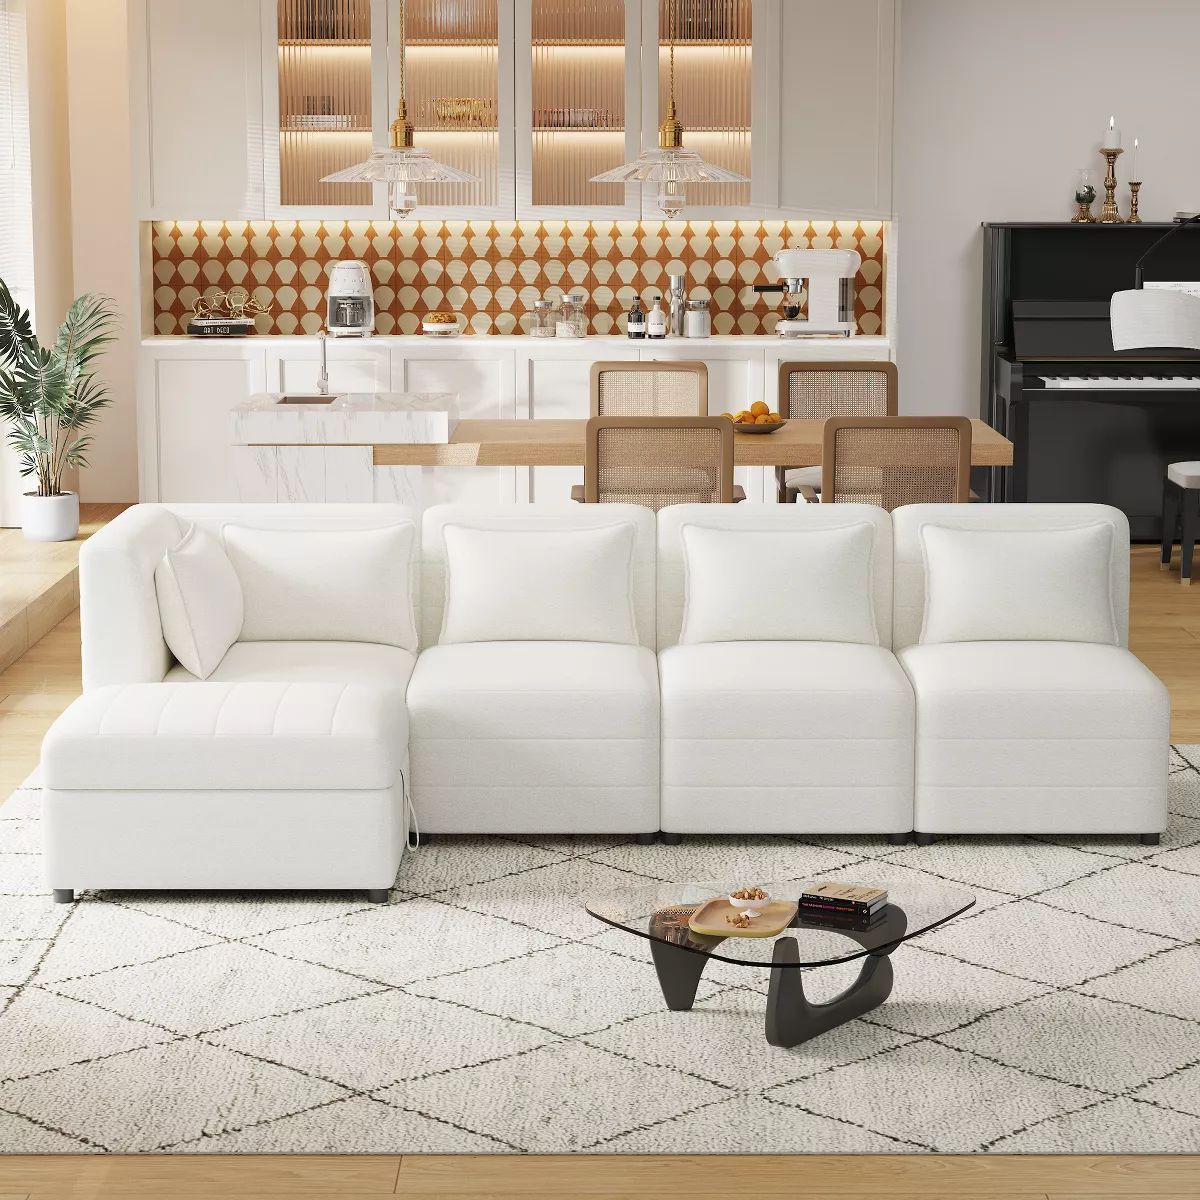 5 Seat Sectional Sofa, Free-Combined Modular Sofa Couches with Storage Ottoman-ModernLuxe | Target